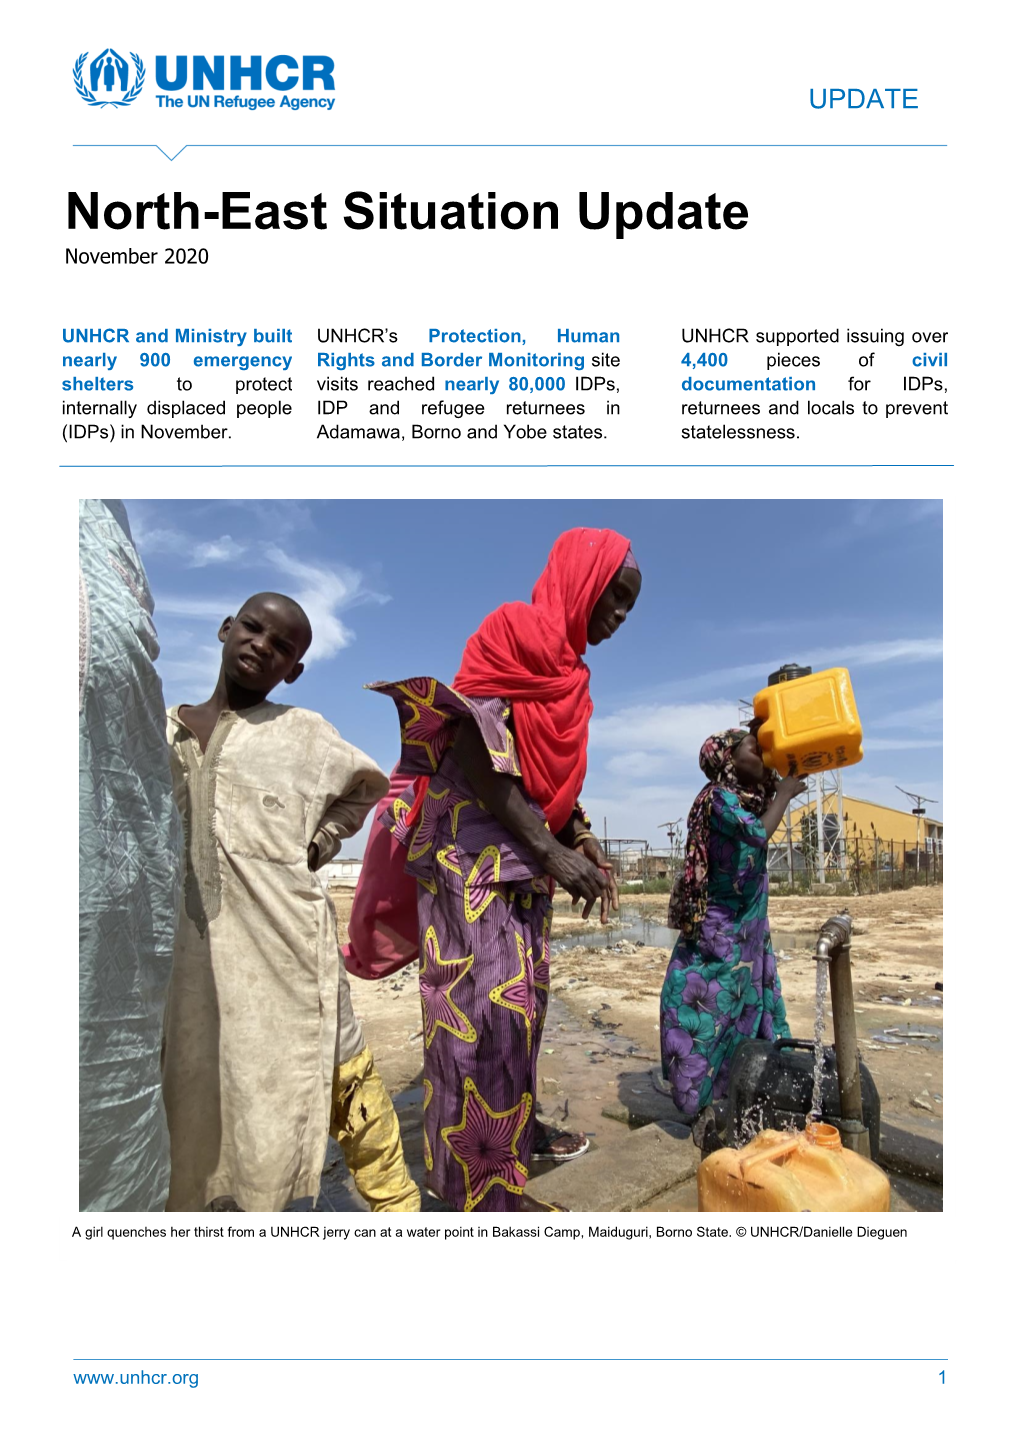 North-East Situation Update November 2020